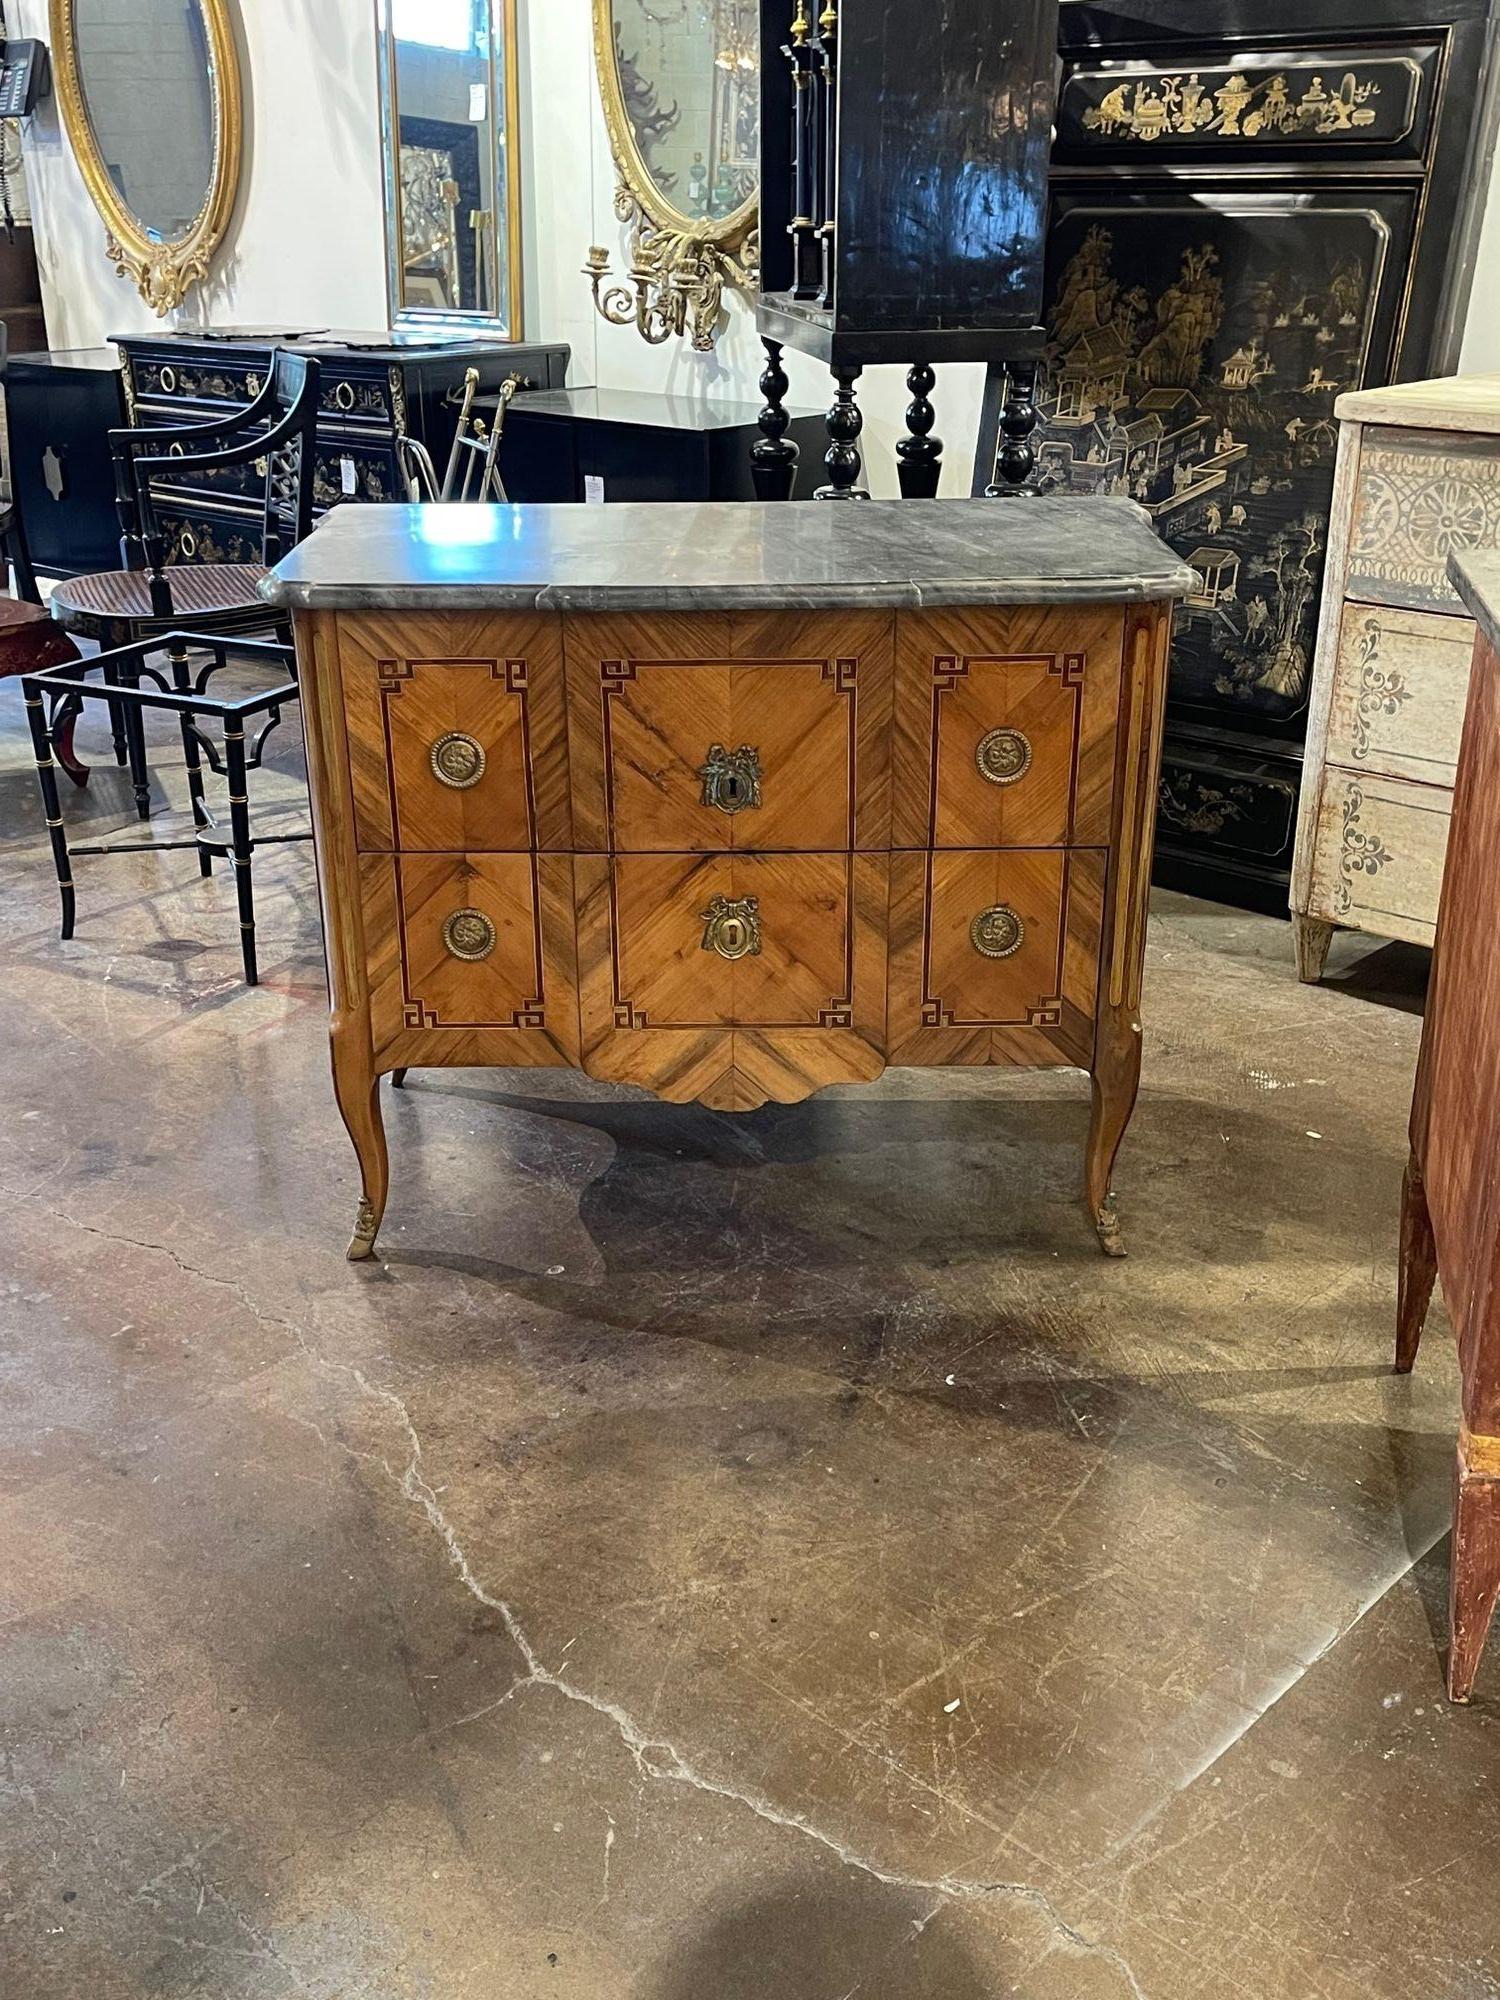 Handsome 18th century French Transitional inlaid walnut commode with a beautiful marble top. Creates a real touch of elegance. Gorgeous!!.